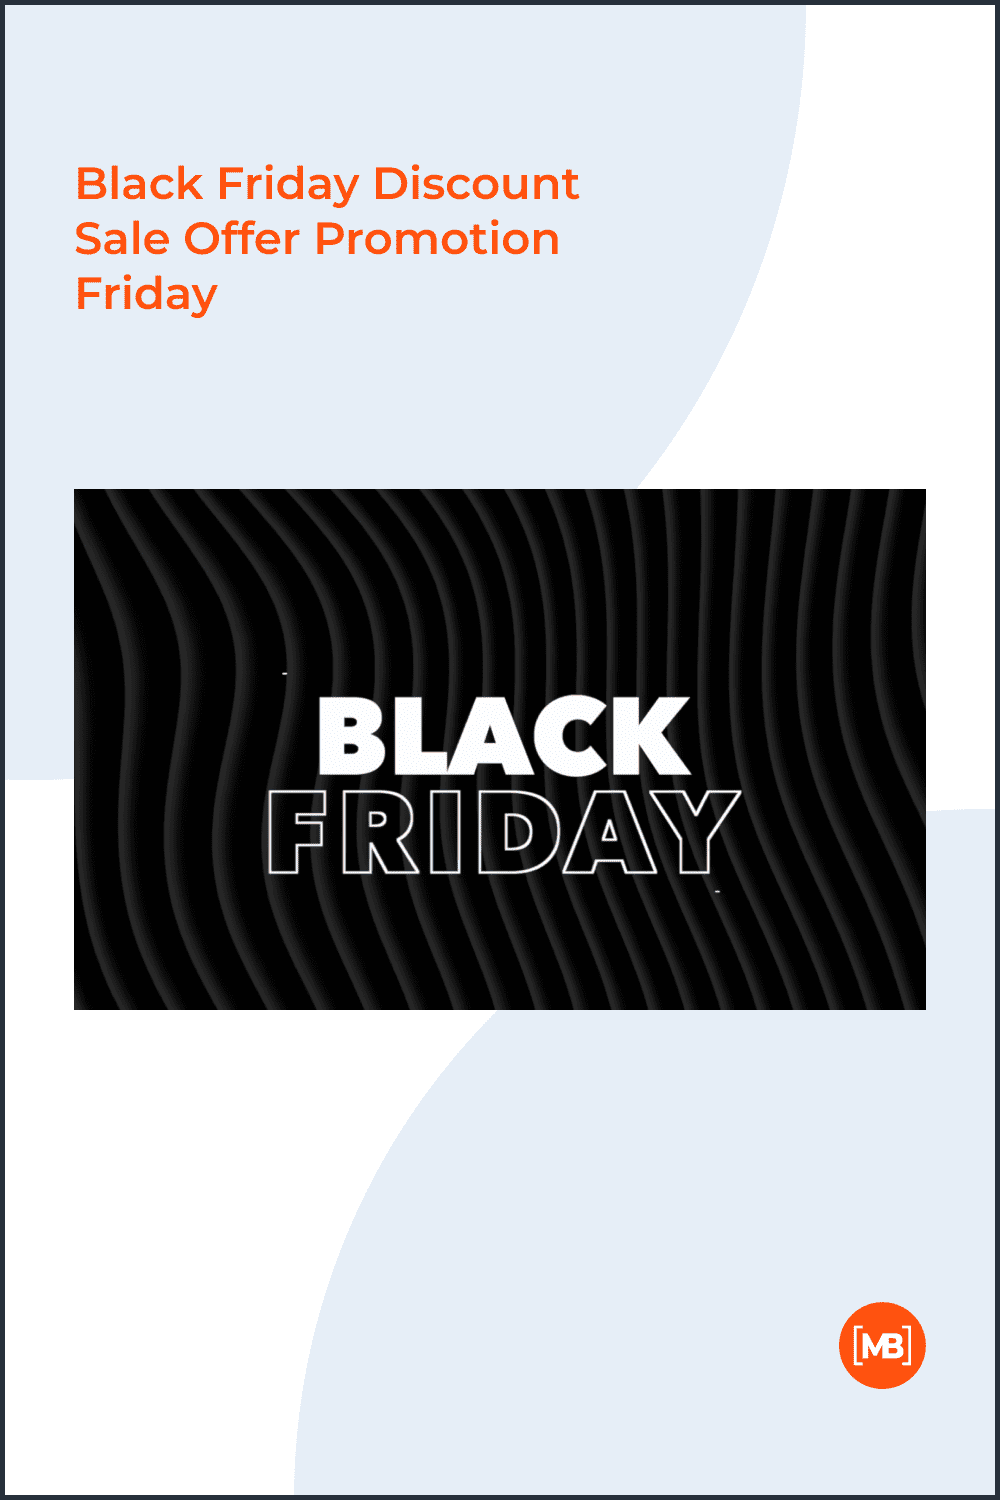 Black Friday discount sale offer promotion friday.